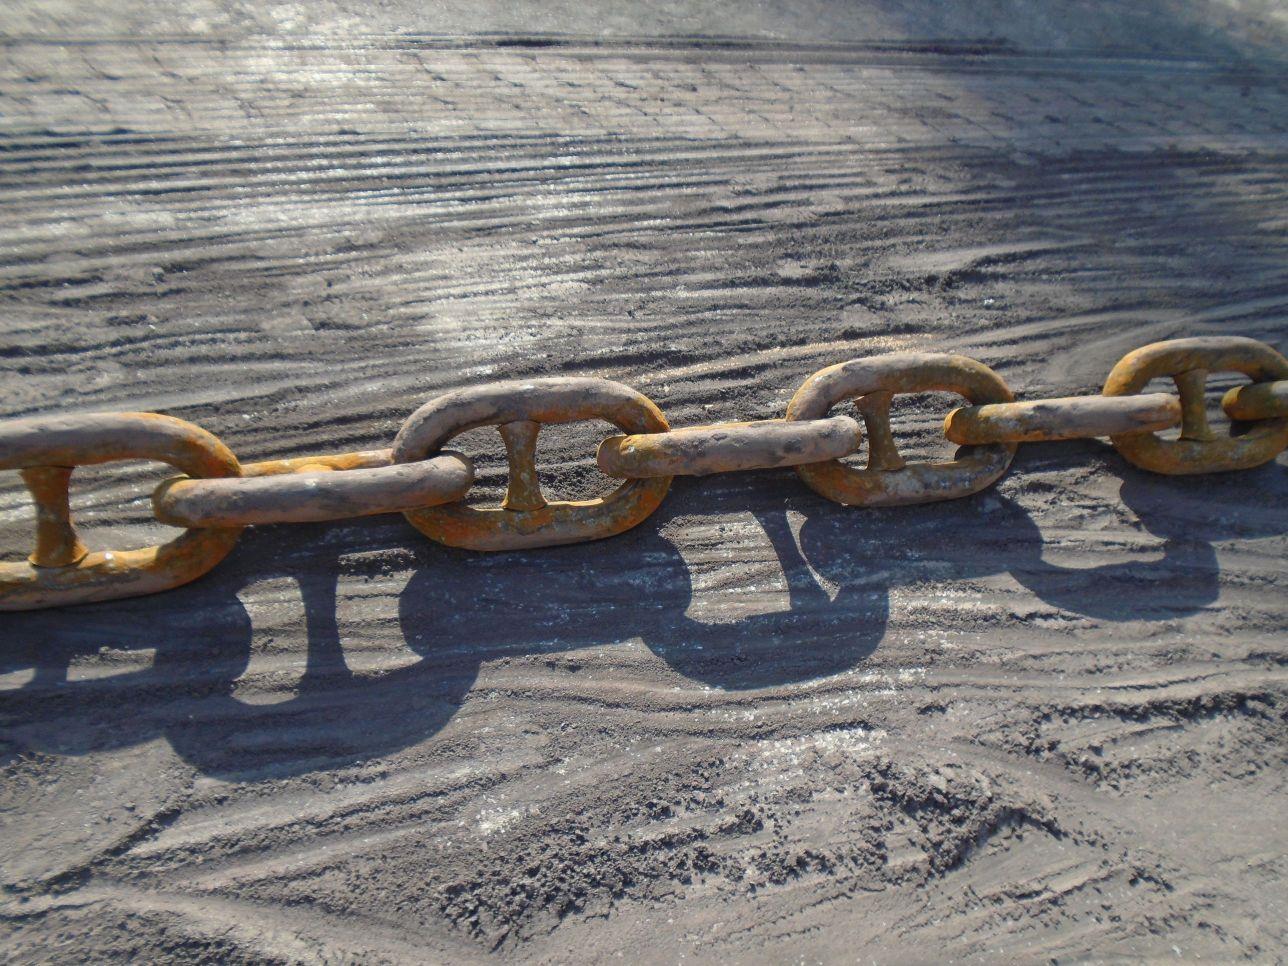 Anchors:Both anchors and anchor chains have been lowered, several stud links need to be